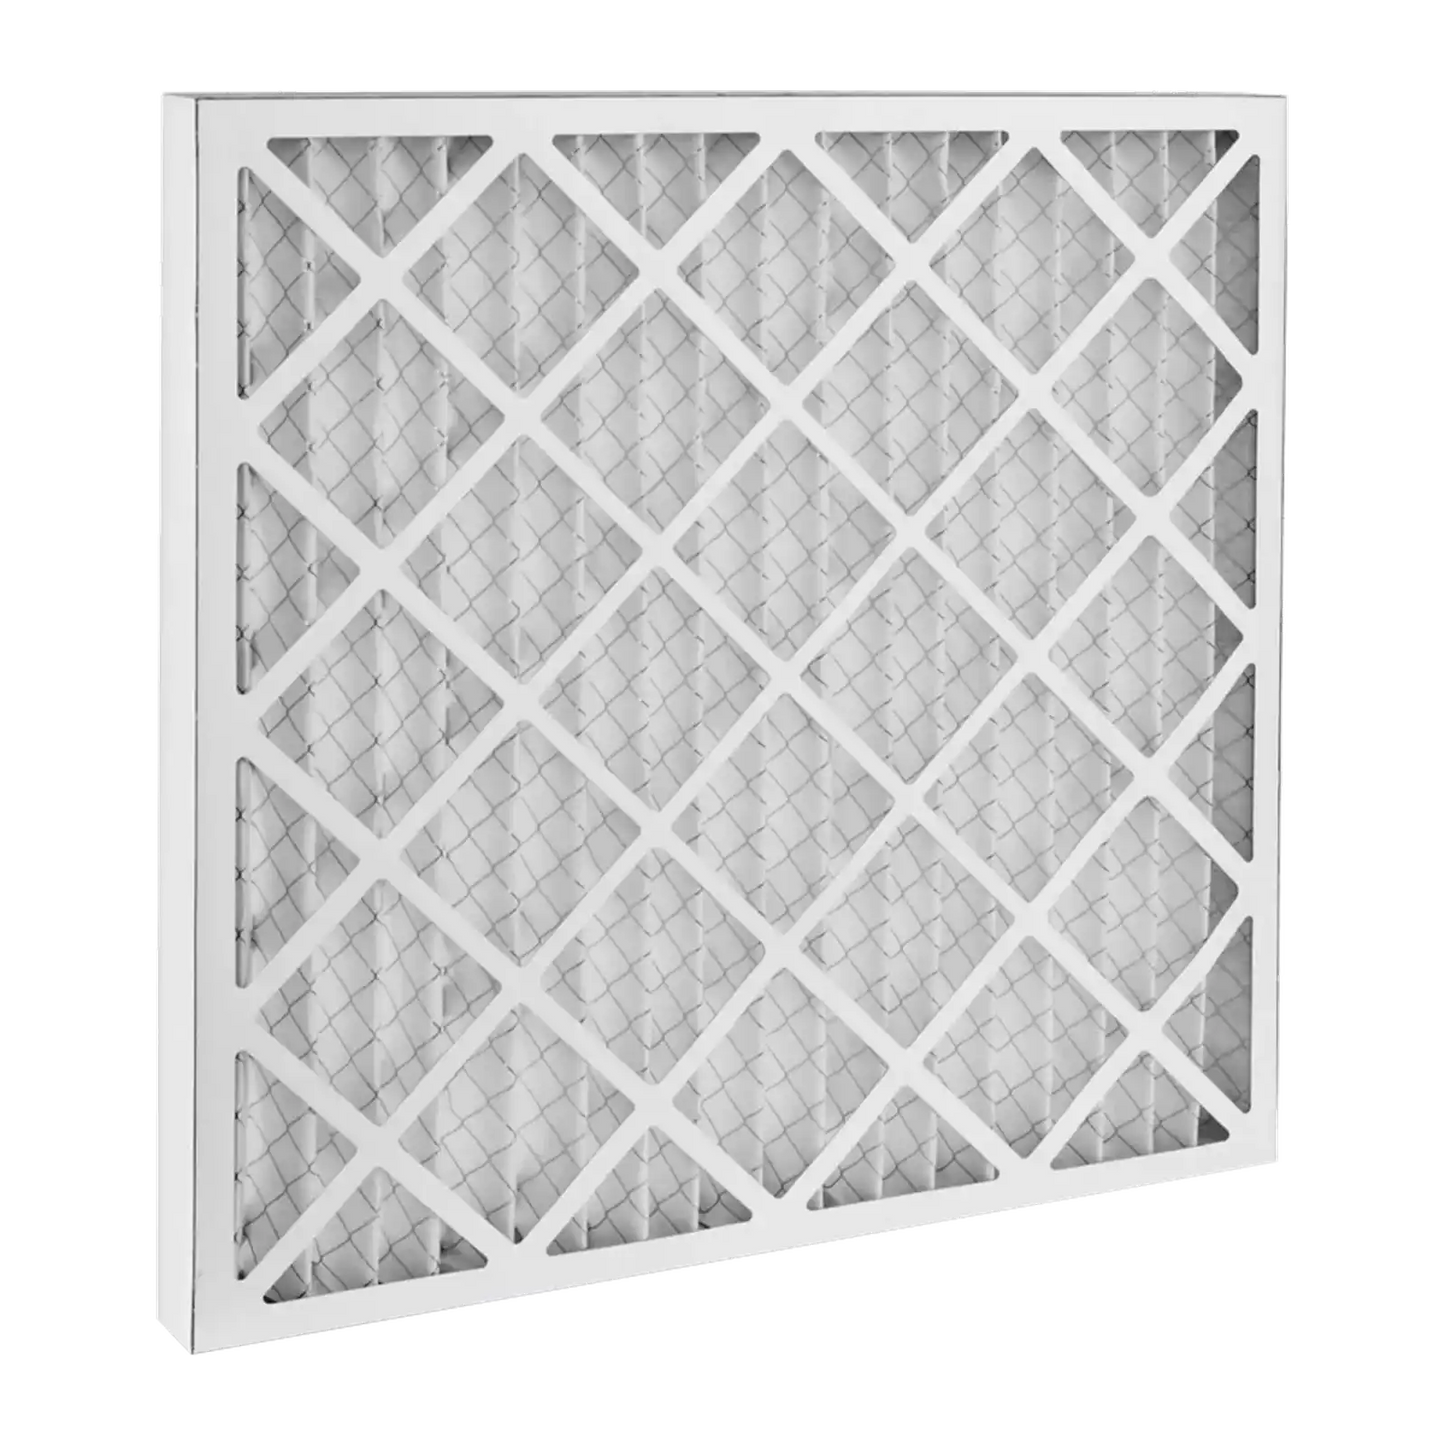 Dafco 20x24x1 Furnace AC Filter - Case of 12